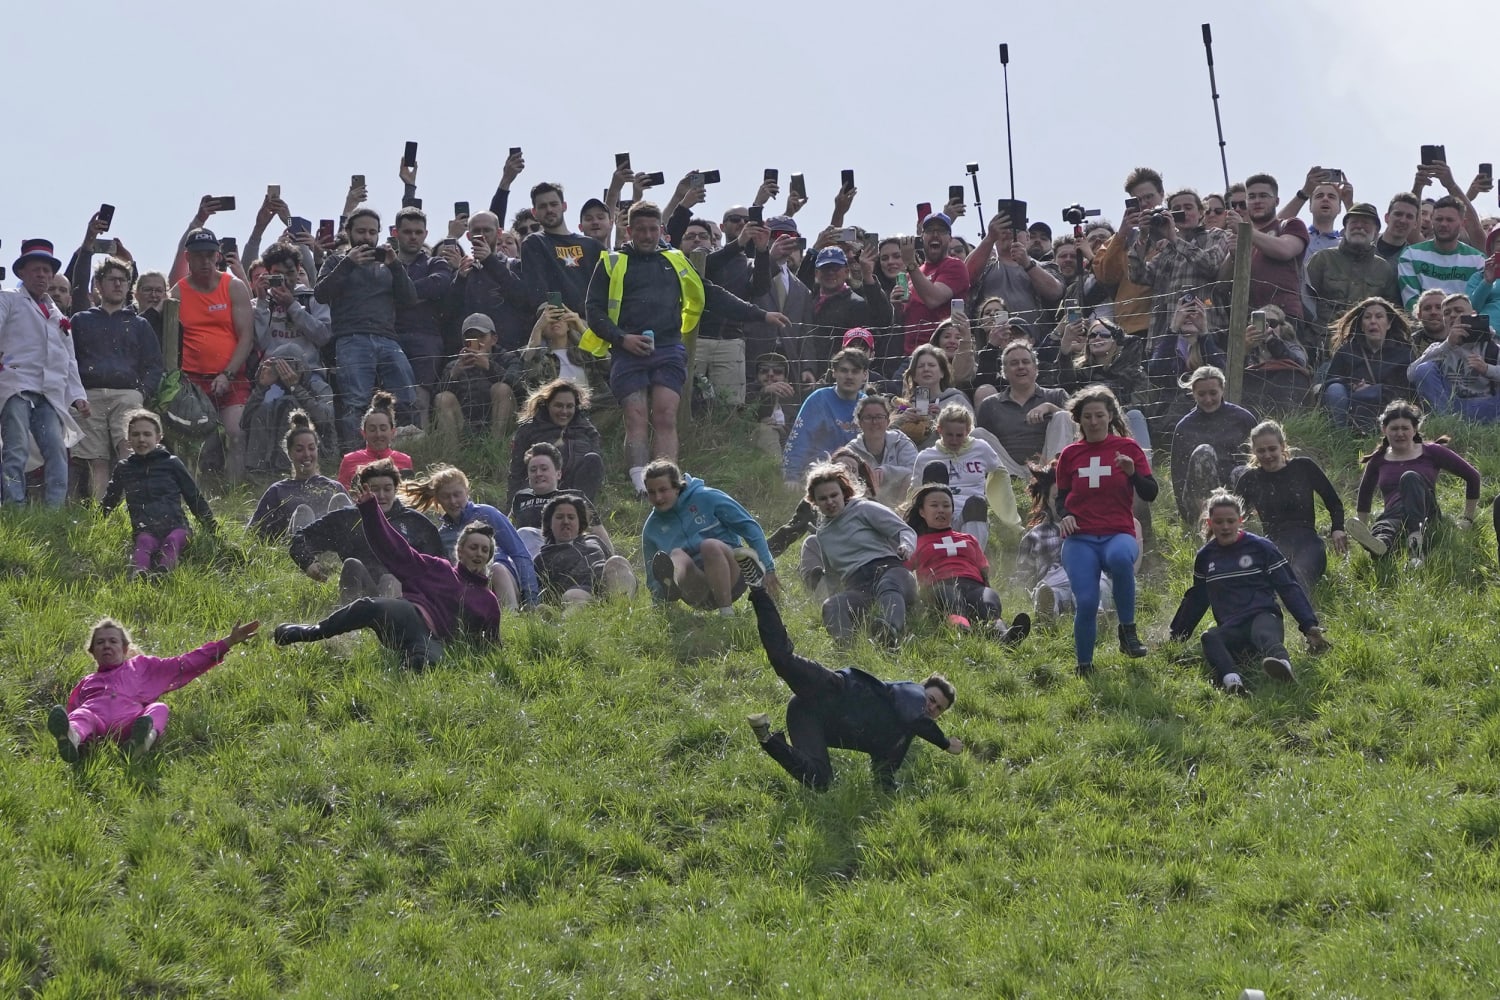 Woman knocked unconscious but wins chaotic U.K. race chasing cheese down a hill